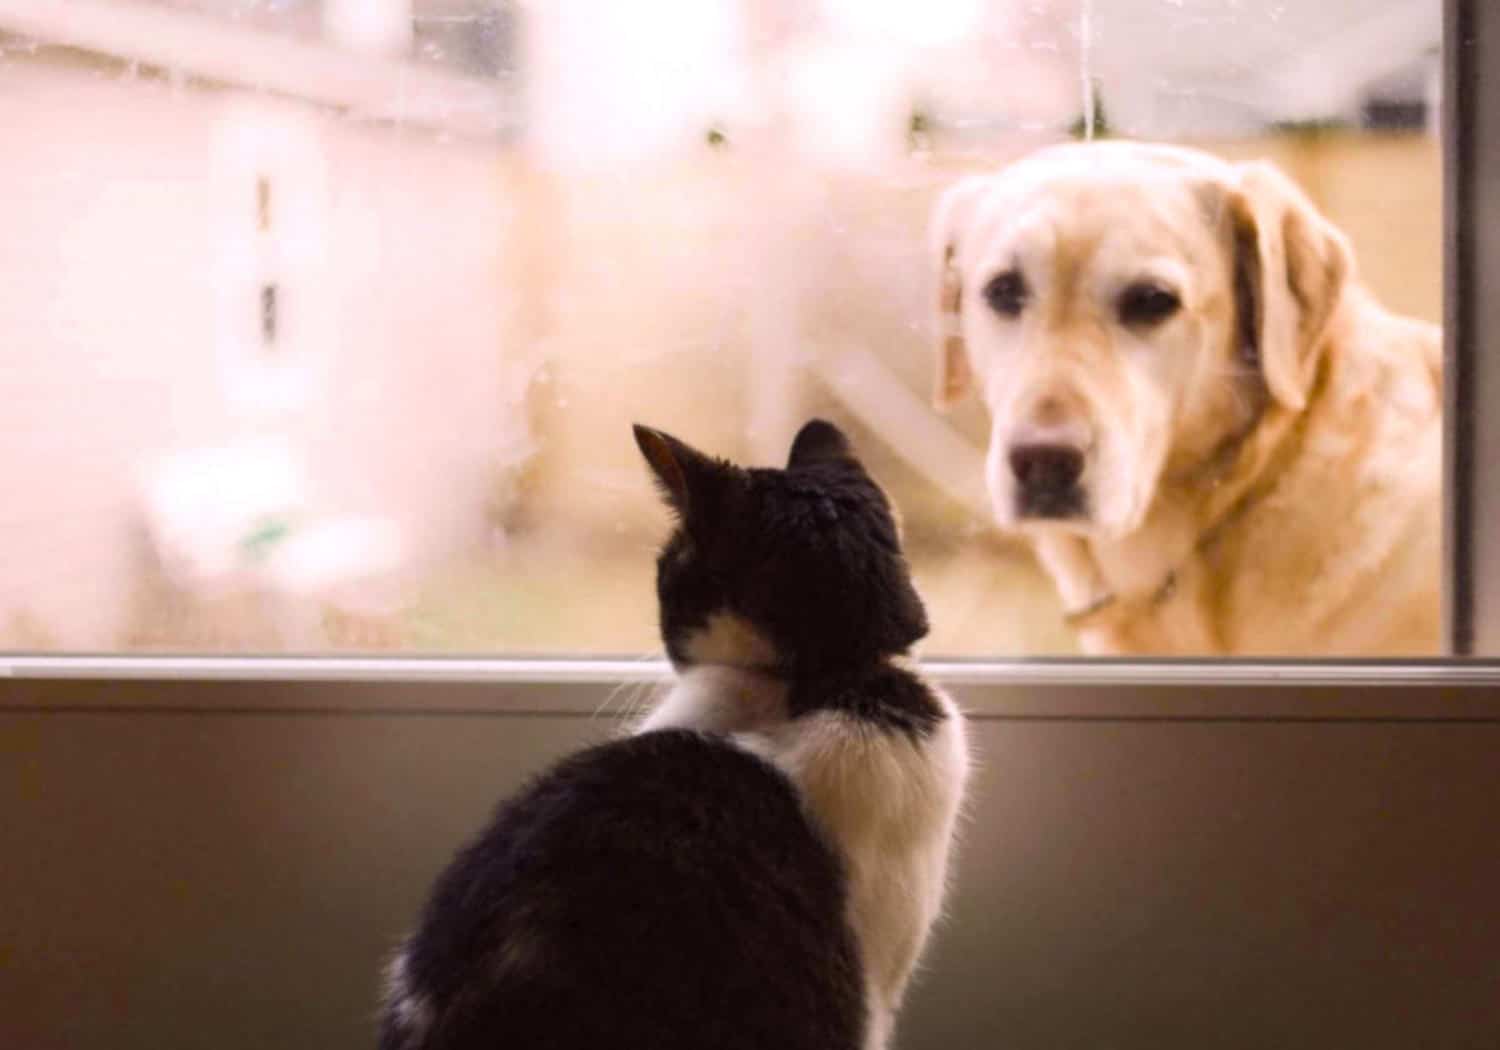 are cats naturally afraid of dogs